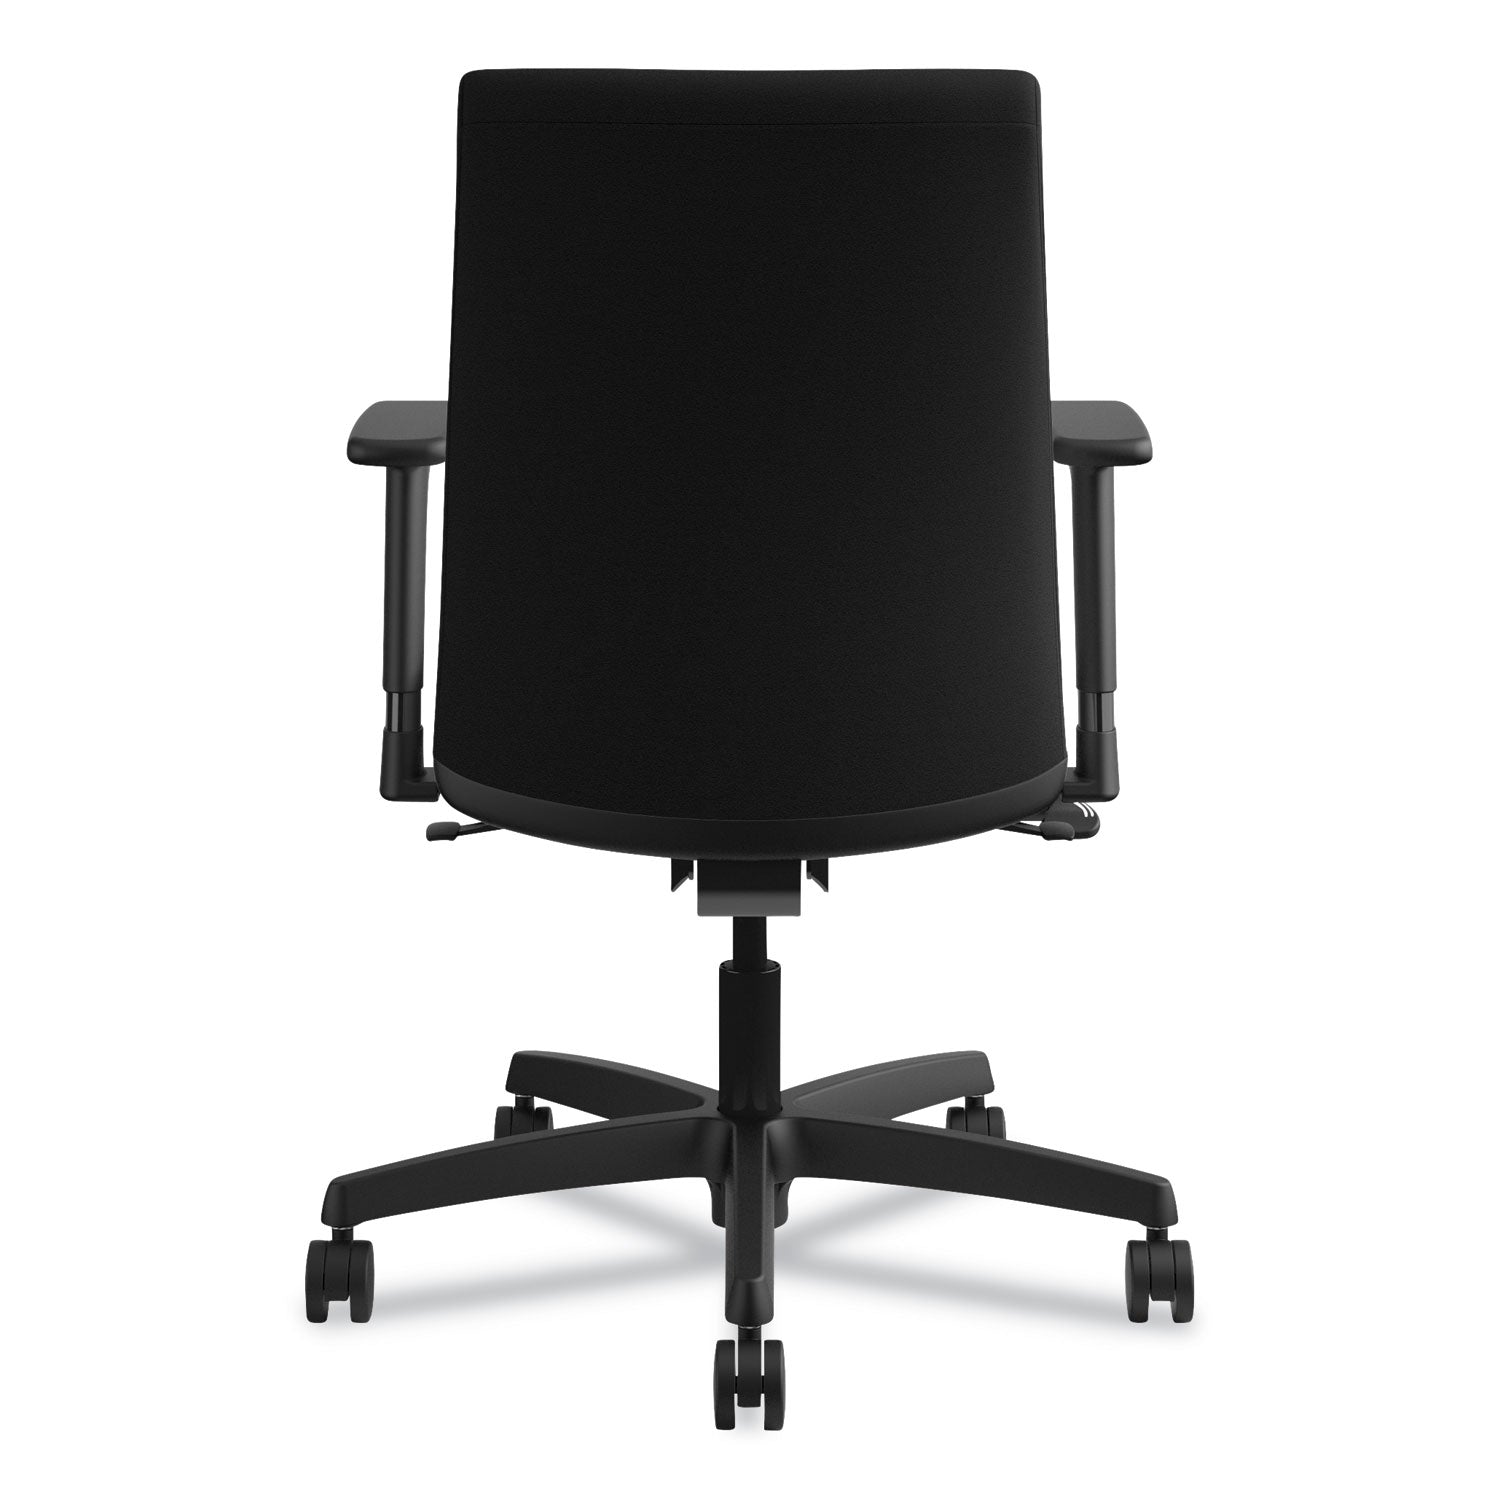 ignition-series-fabric-low-back-task-chair-supports-up-to-300-lb-17-to-215-seat-height-black_honit105cu10 - 7